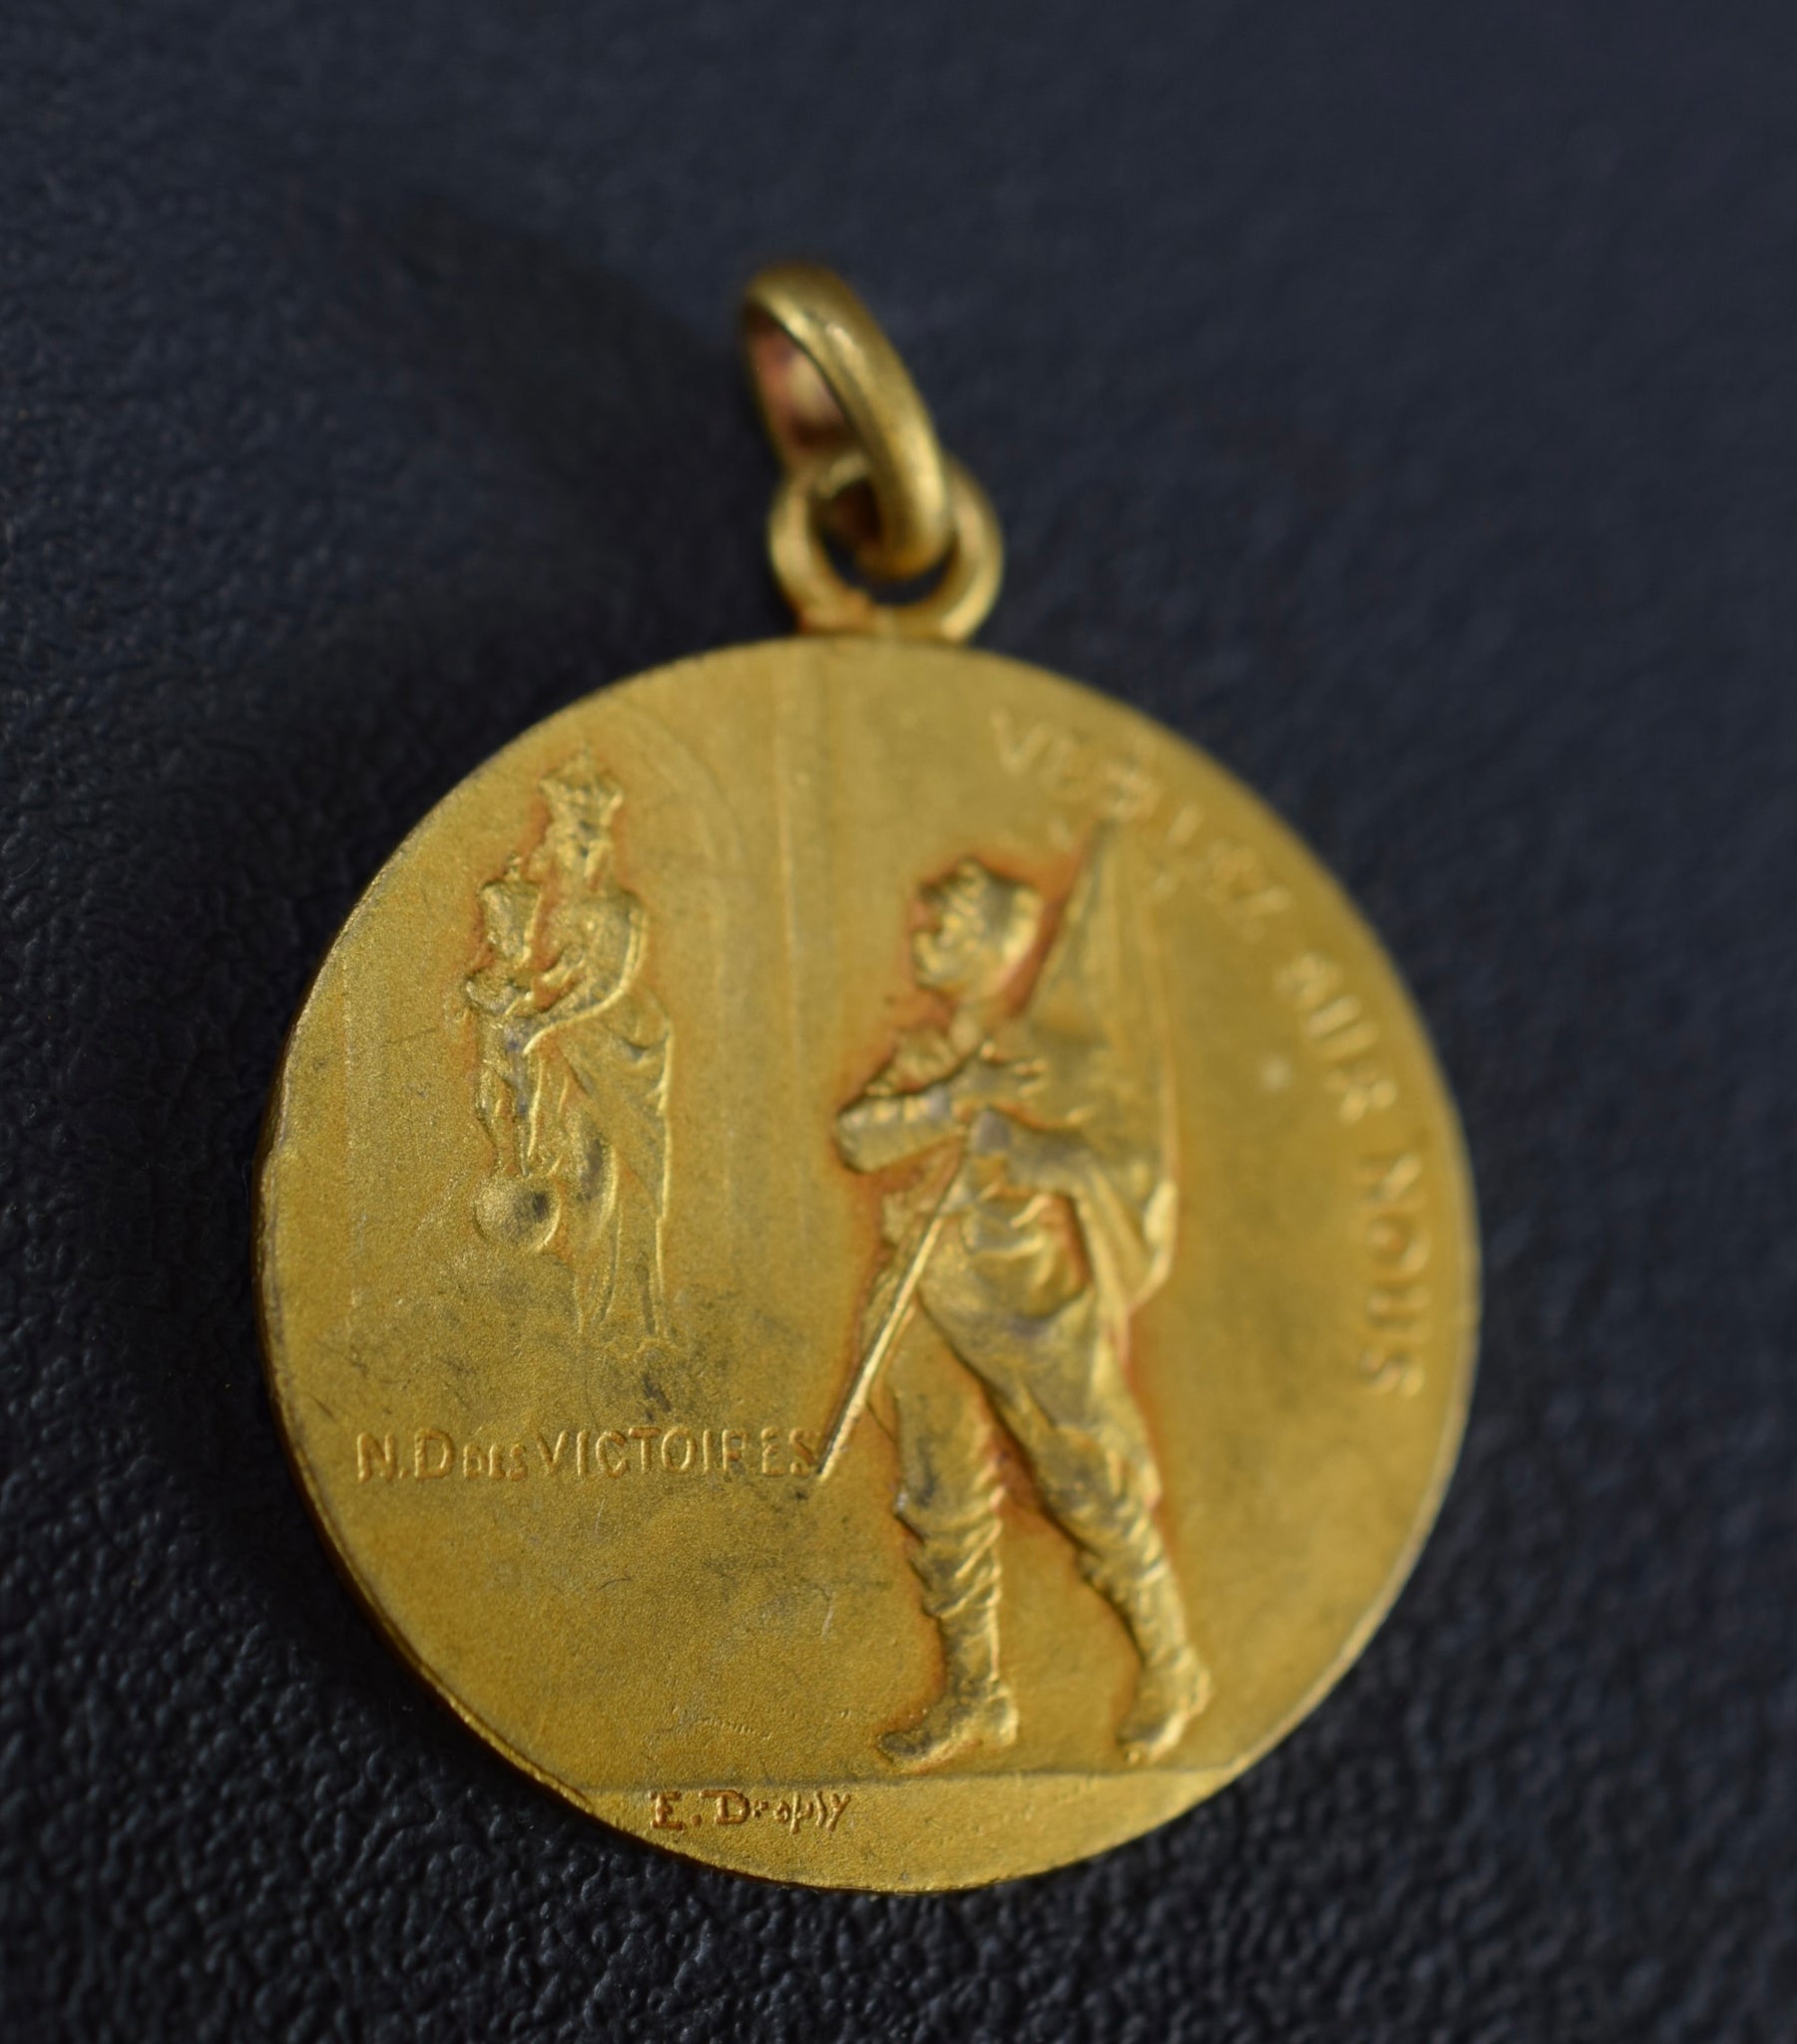 Our Lady of Victory Medal WWI Gold Pendant by Emile Dropsy